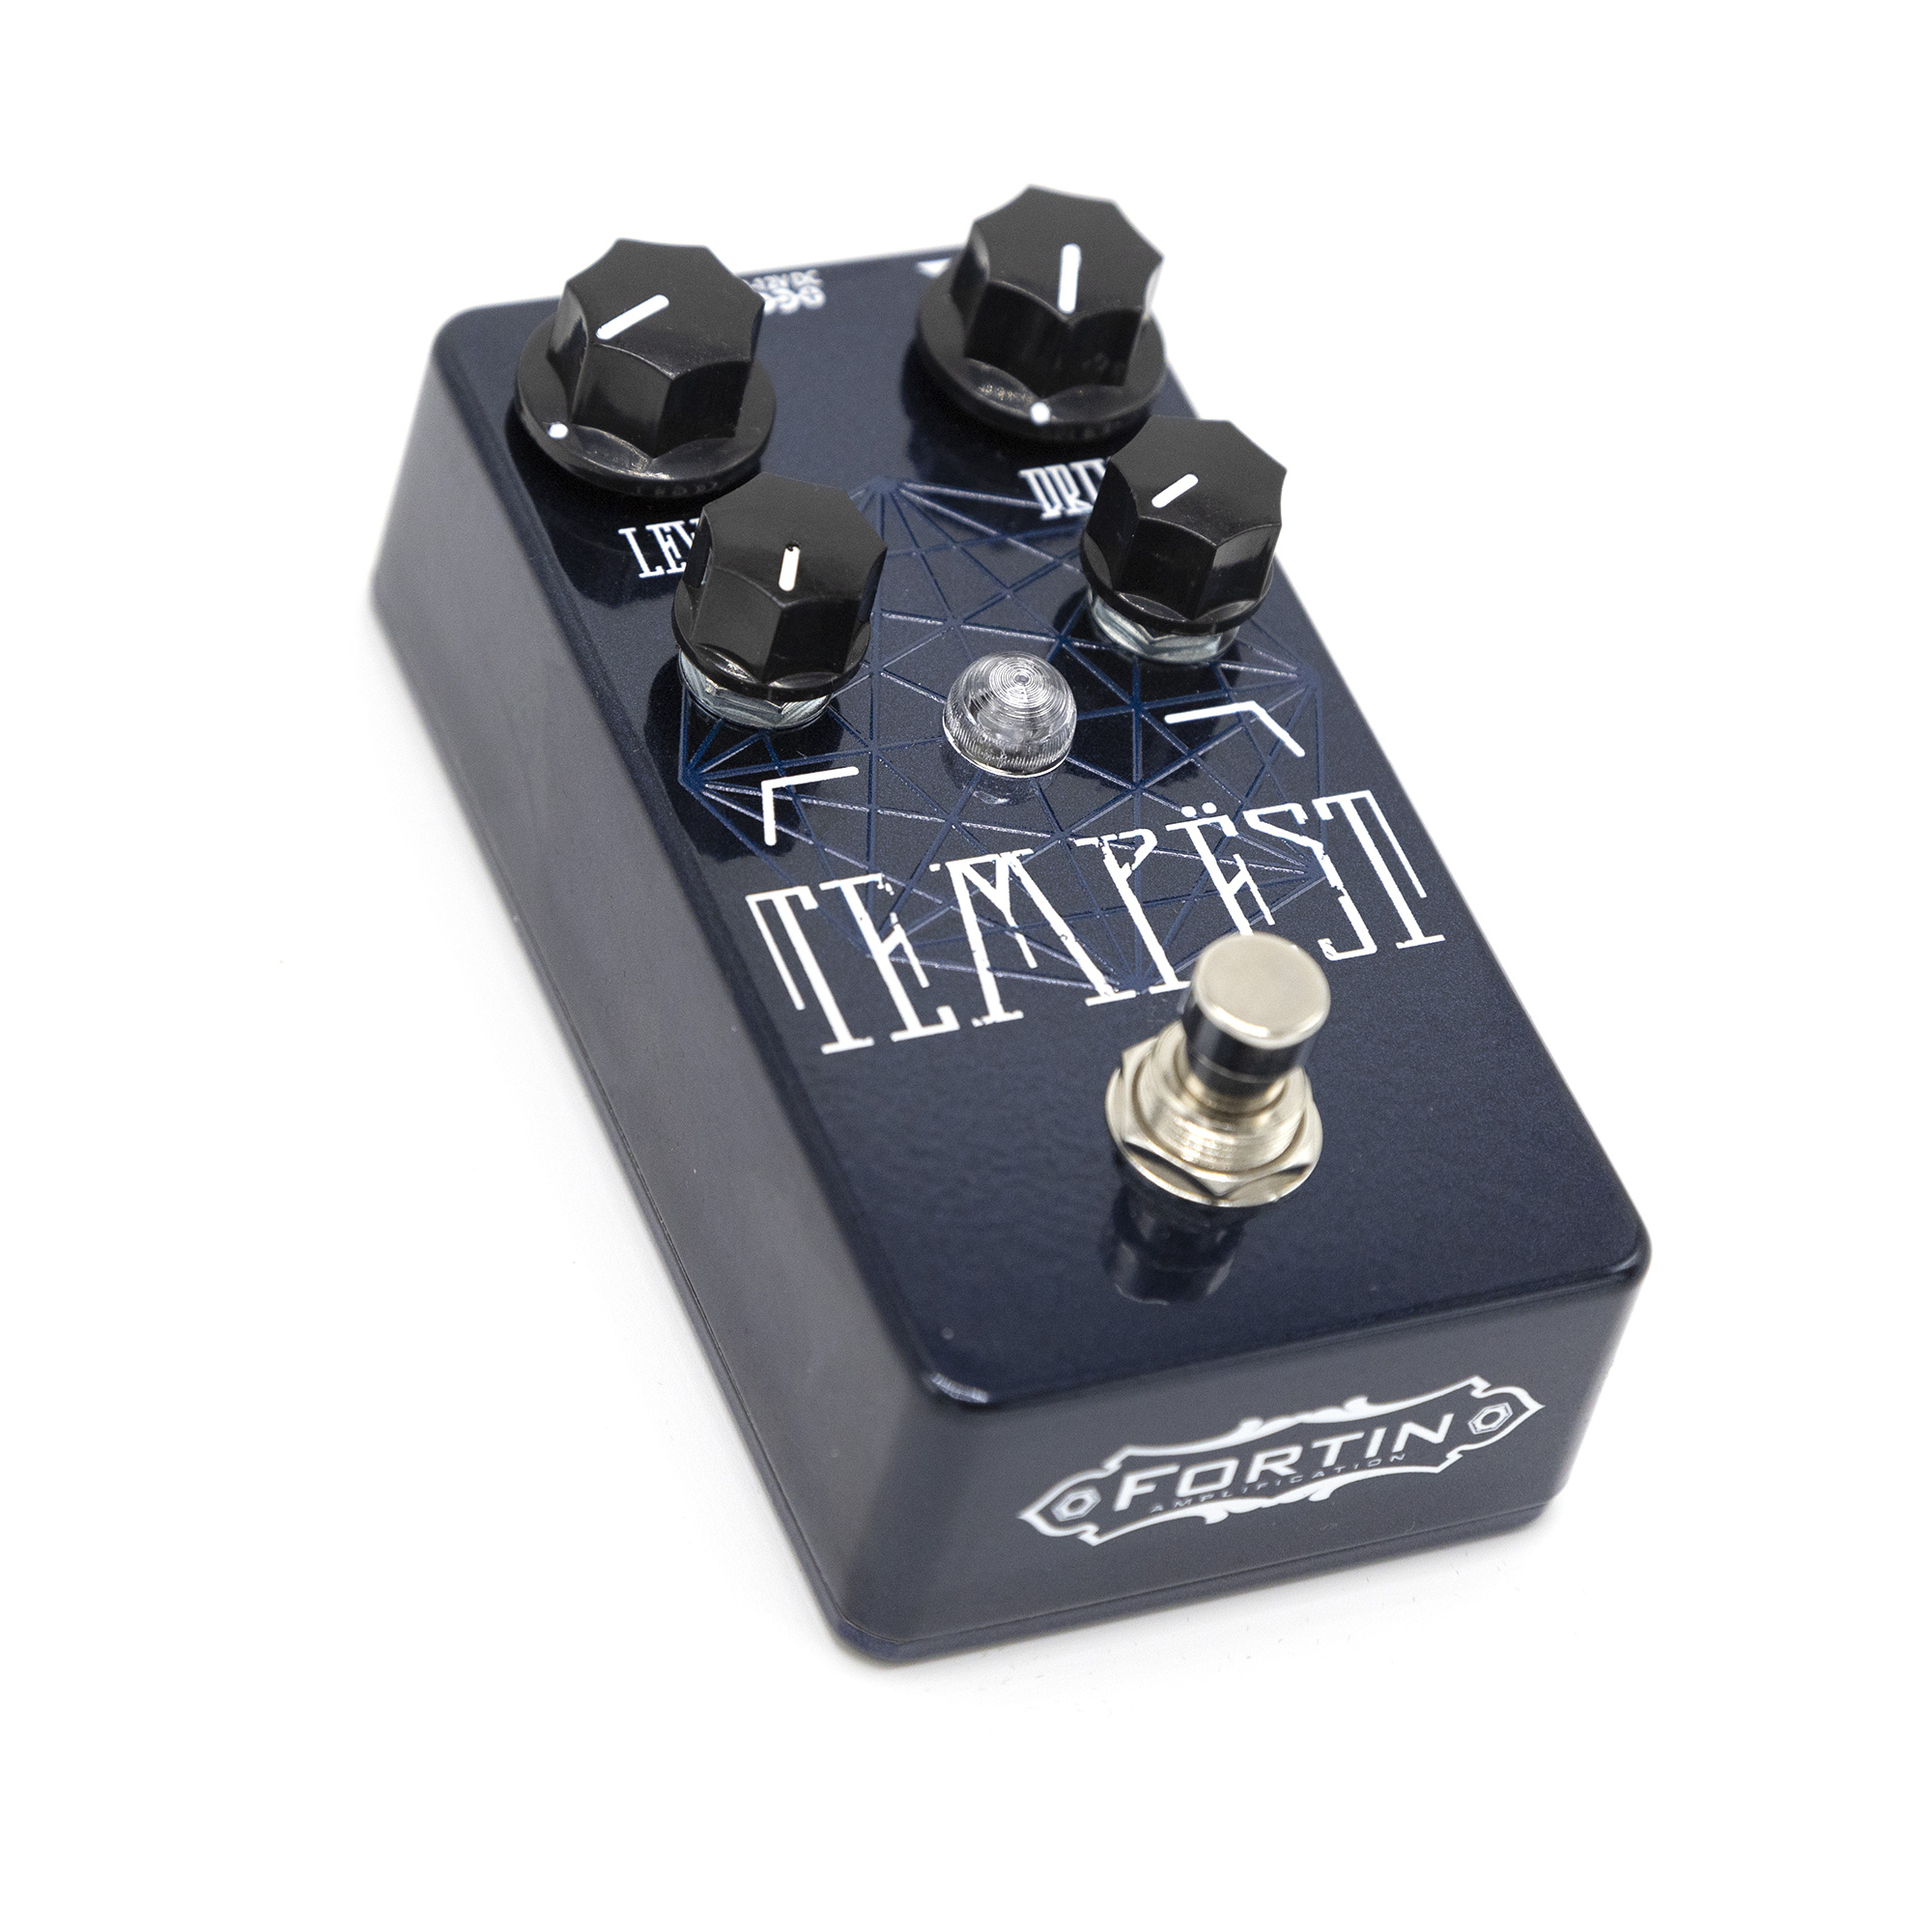 Fortin Amps Tempest Architects Signature Pedal - Overdrive/Distortion/Fuzz Effektpedal - Variation 1